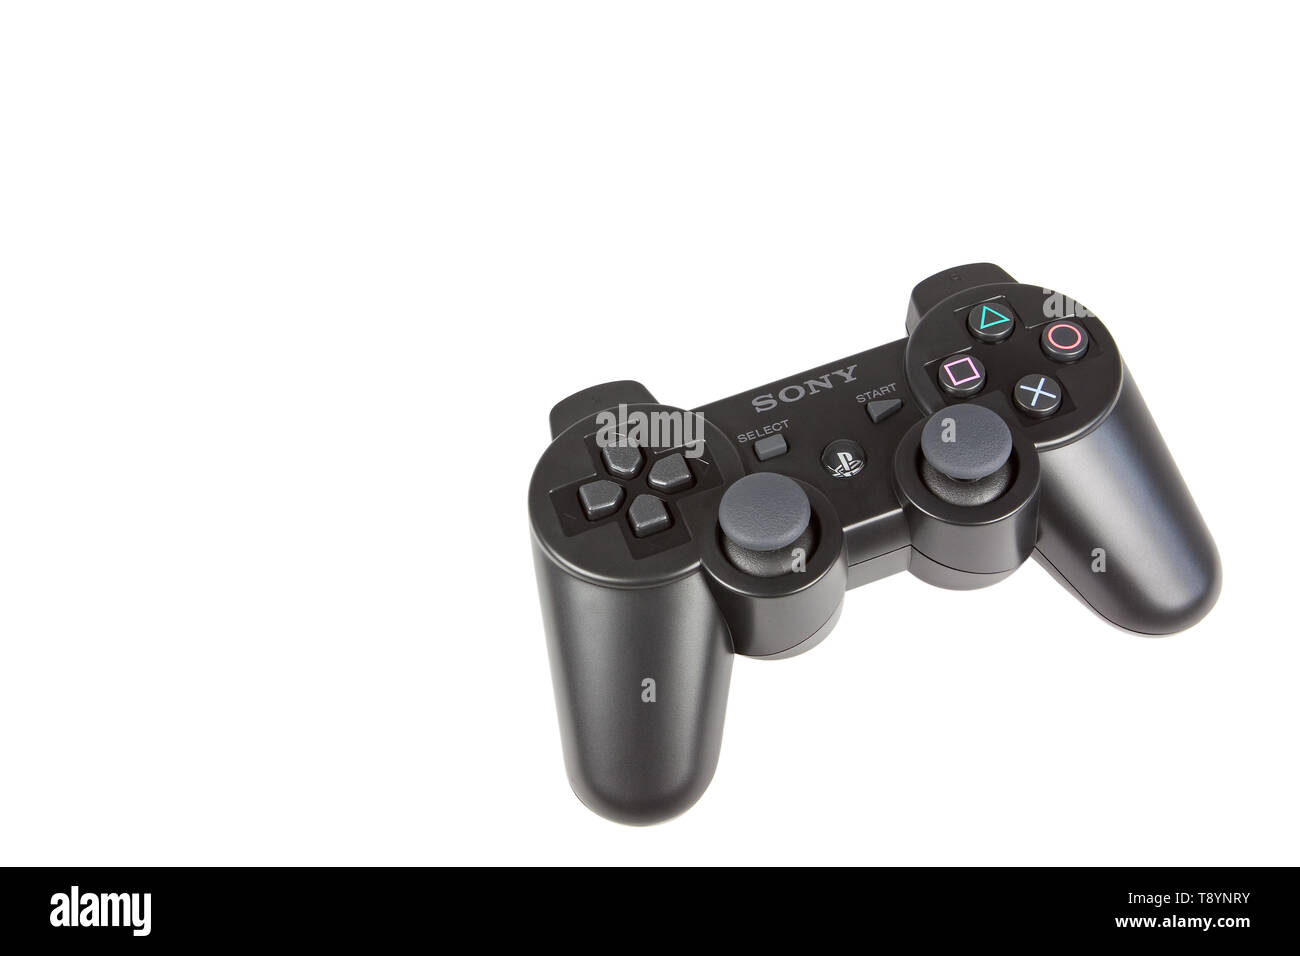 A Sony Playstation 3 PS3 games console controller. Stock Photo